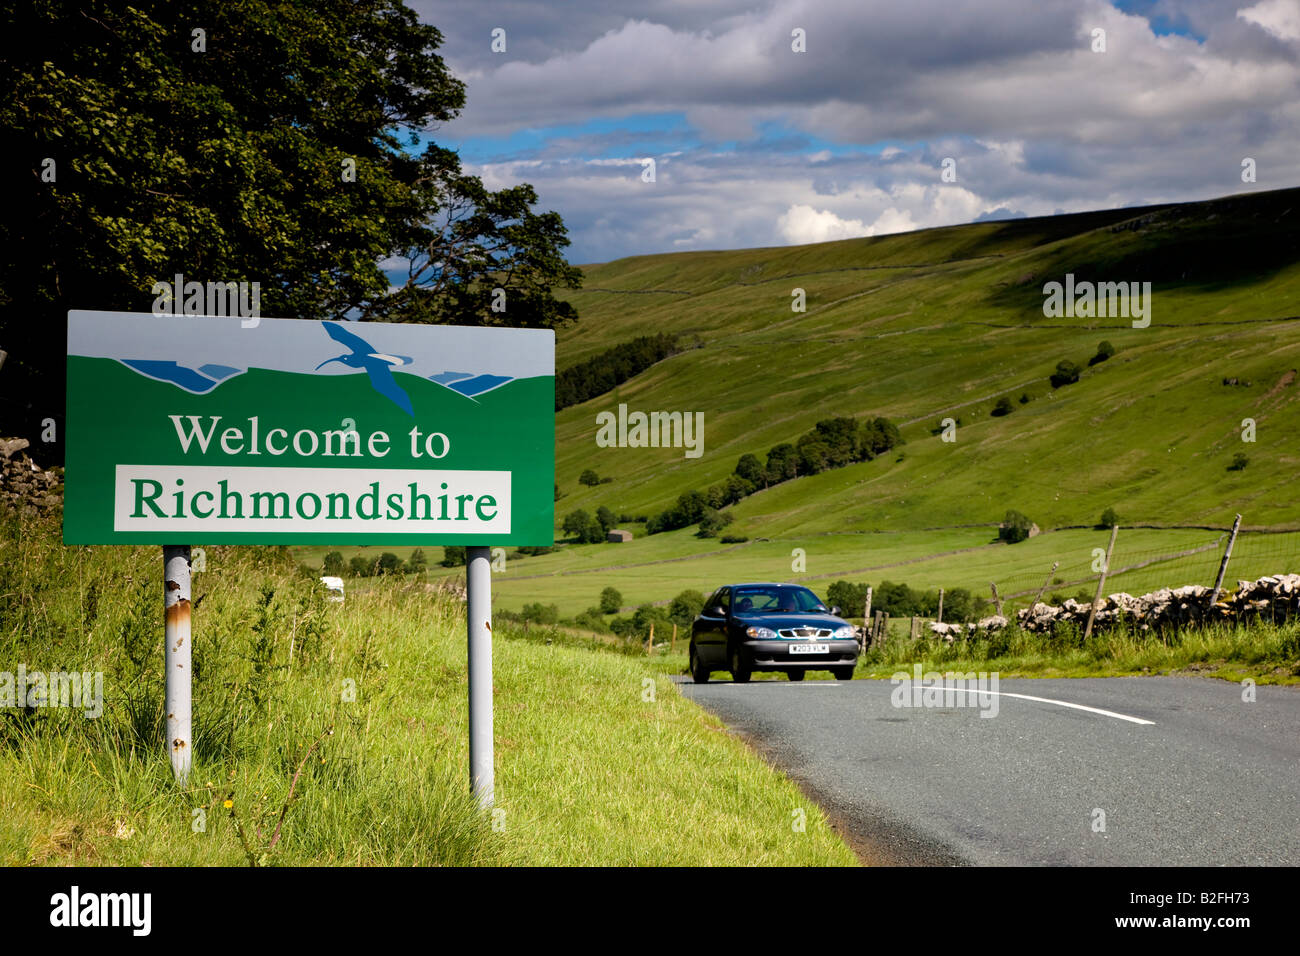 Entrance to Richmondshire at Kidstones Bank Bishopdale Yorkshire Dales National Park Stock Photo